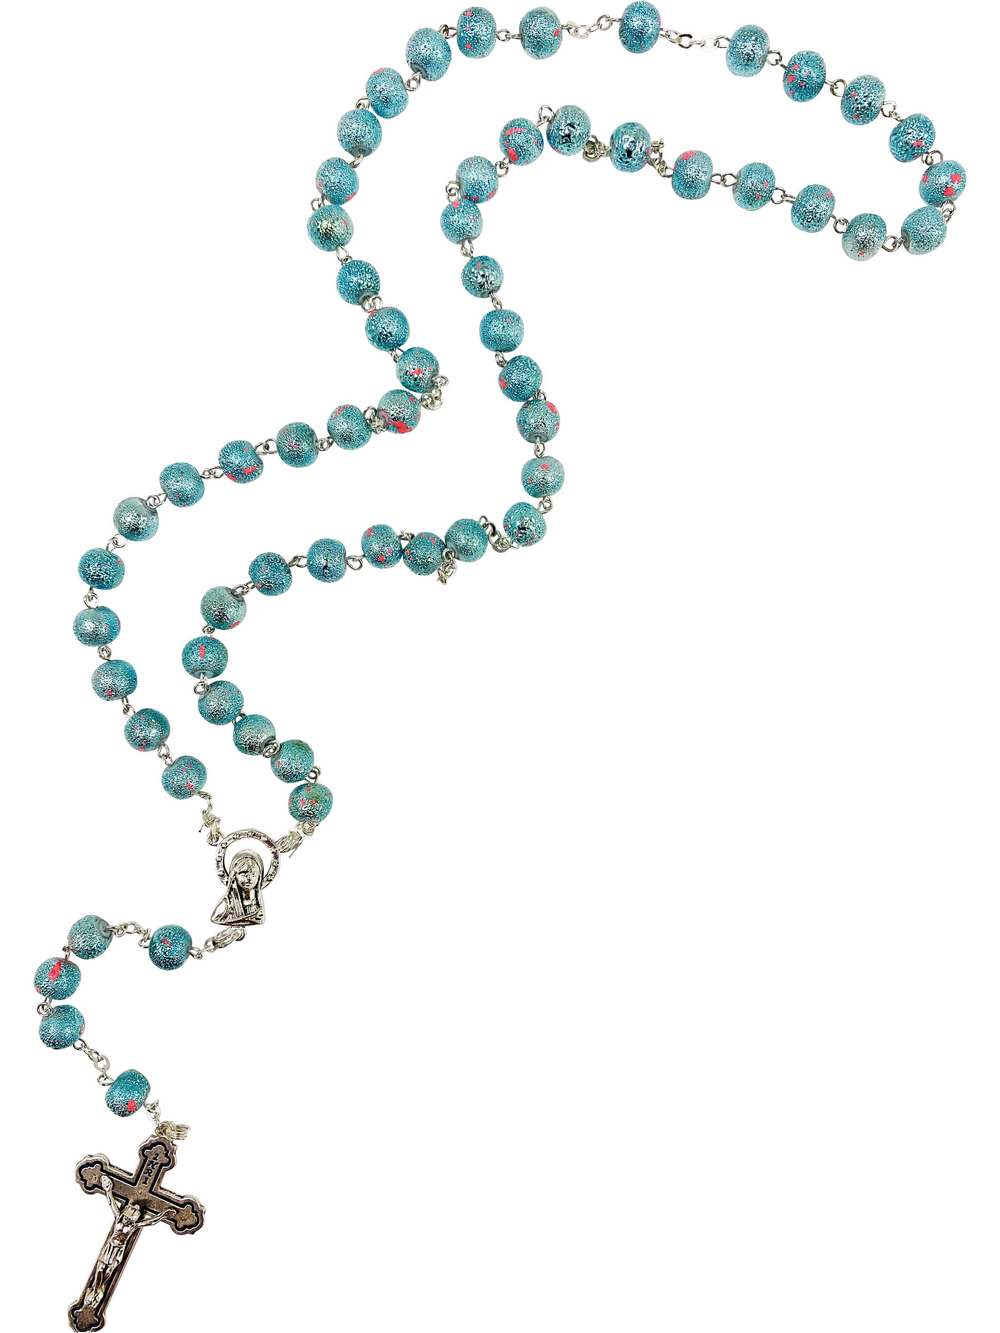  Farmhouse Clay Rosary Beads 44 Turquoise